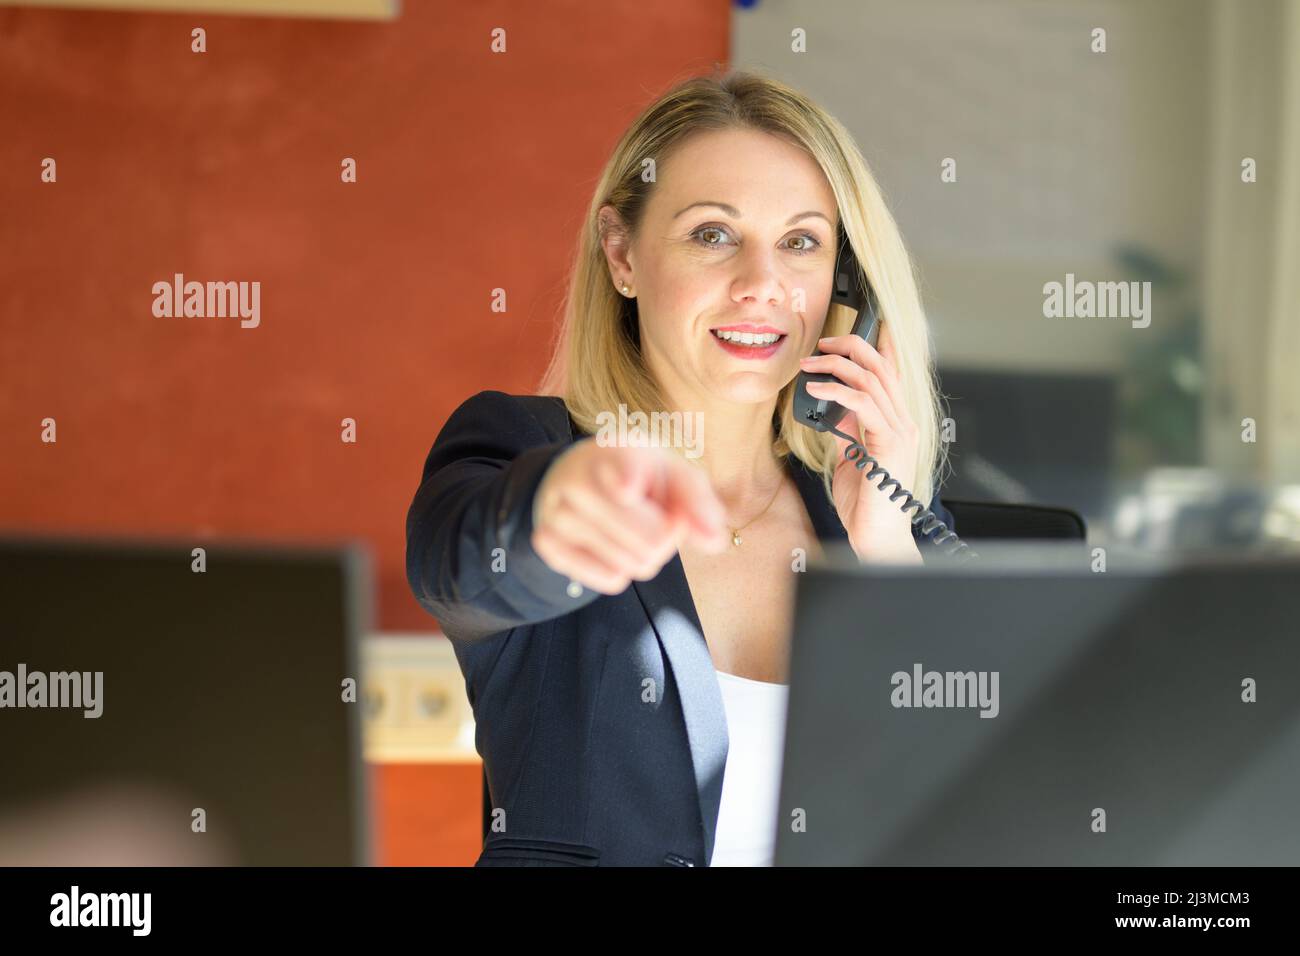 Portrait of business woman in formal clothing pointing towards camera while in a conversation over landline telephone in office Stock Photo